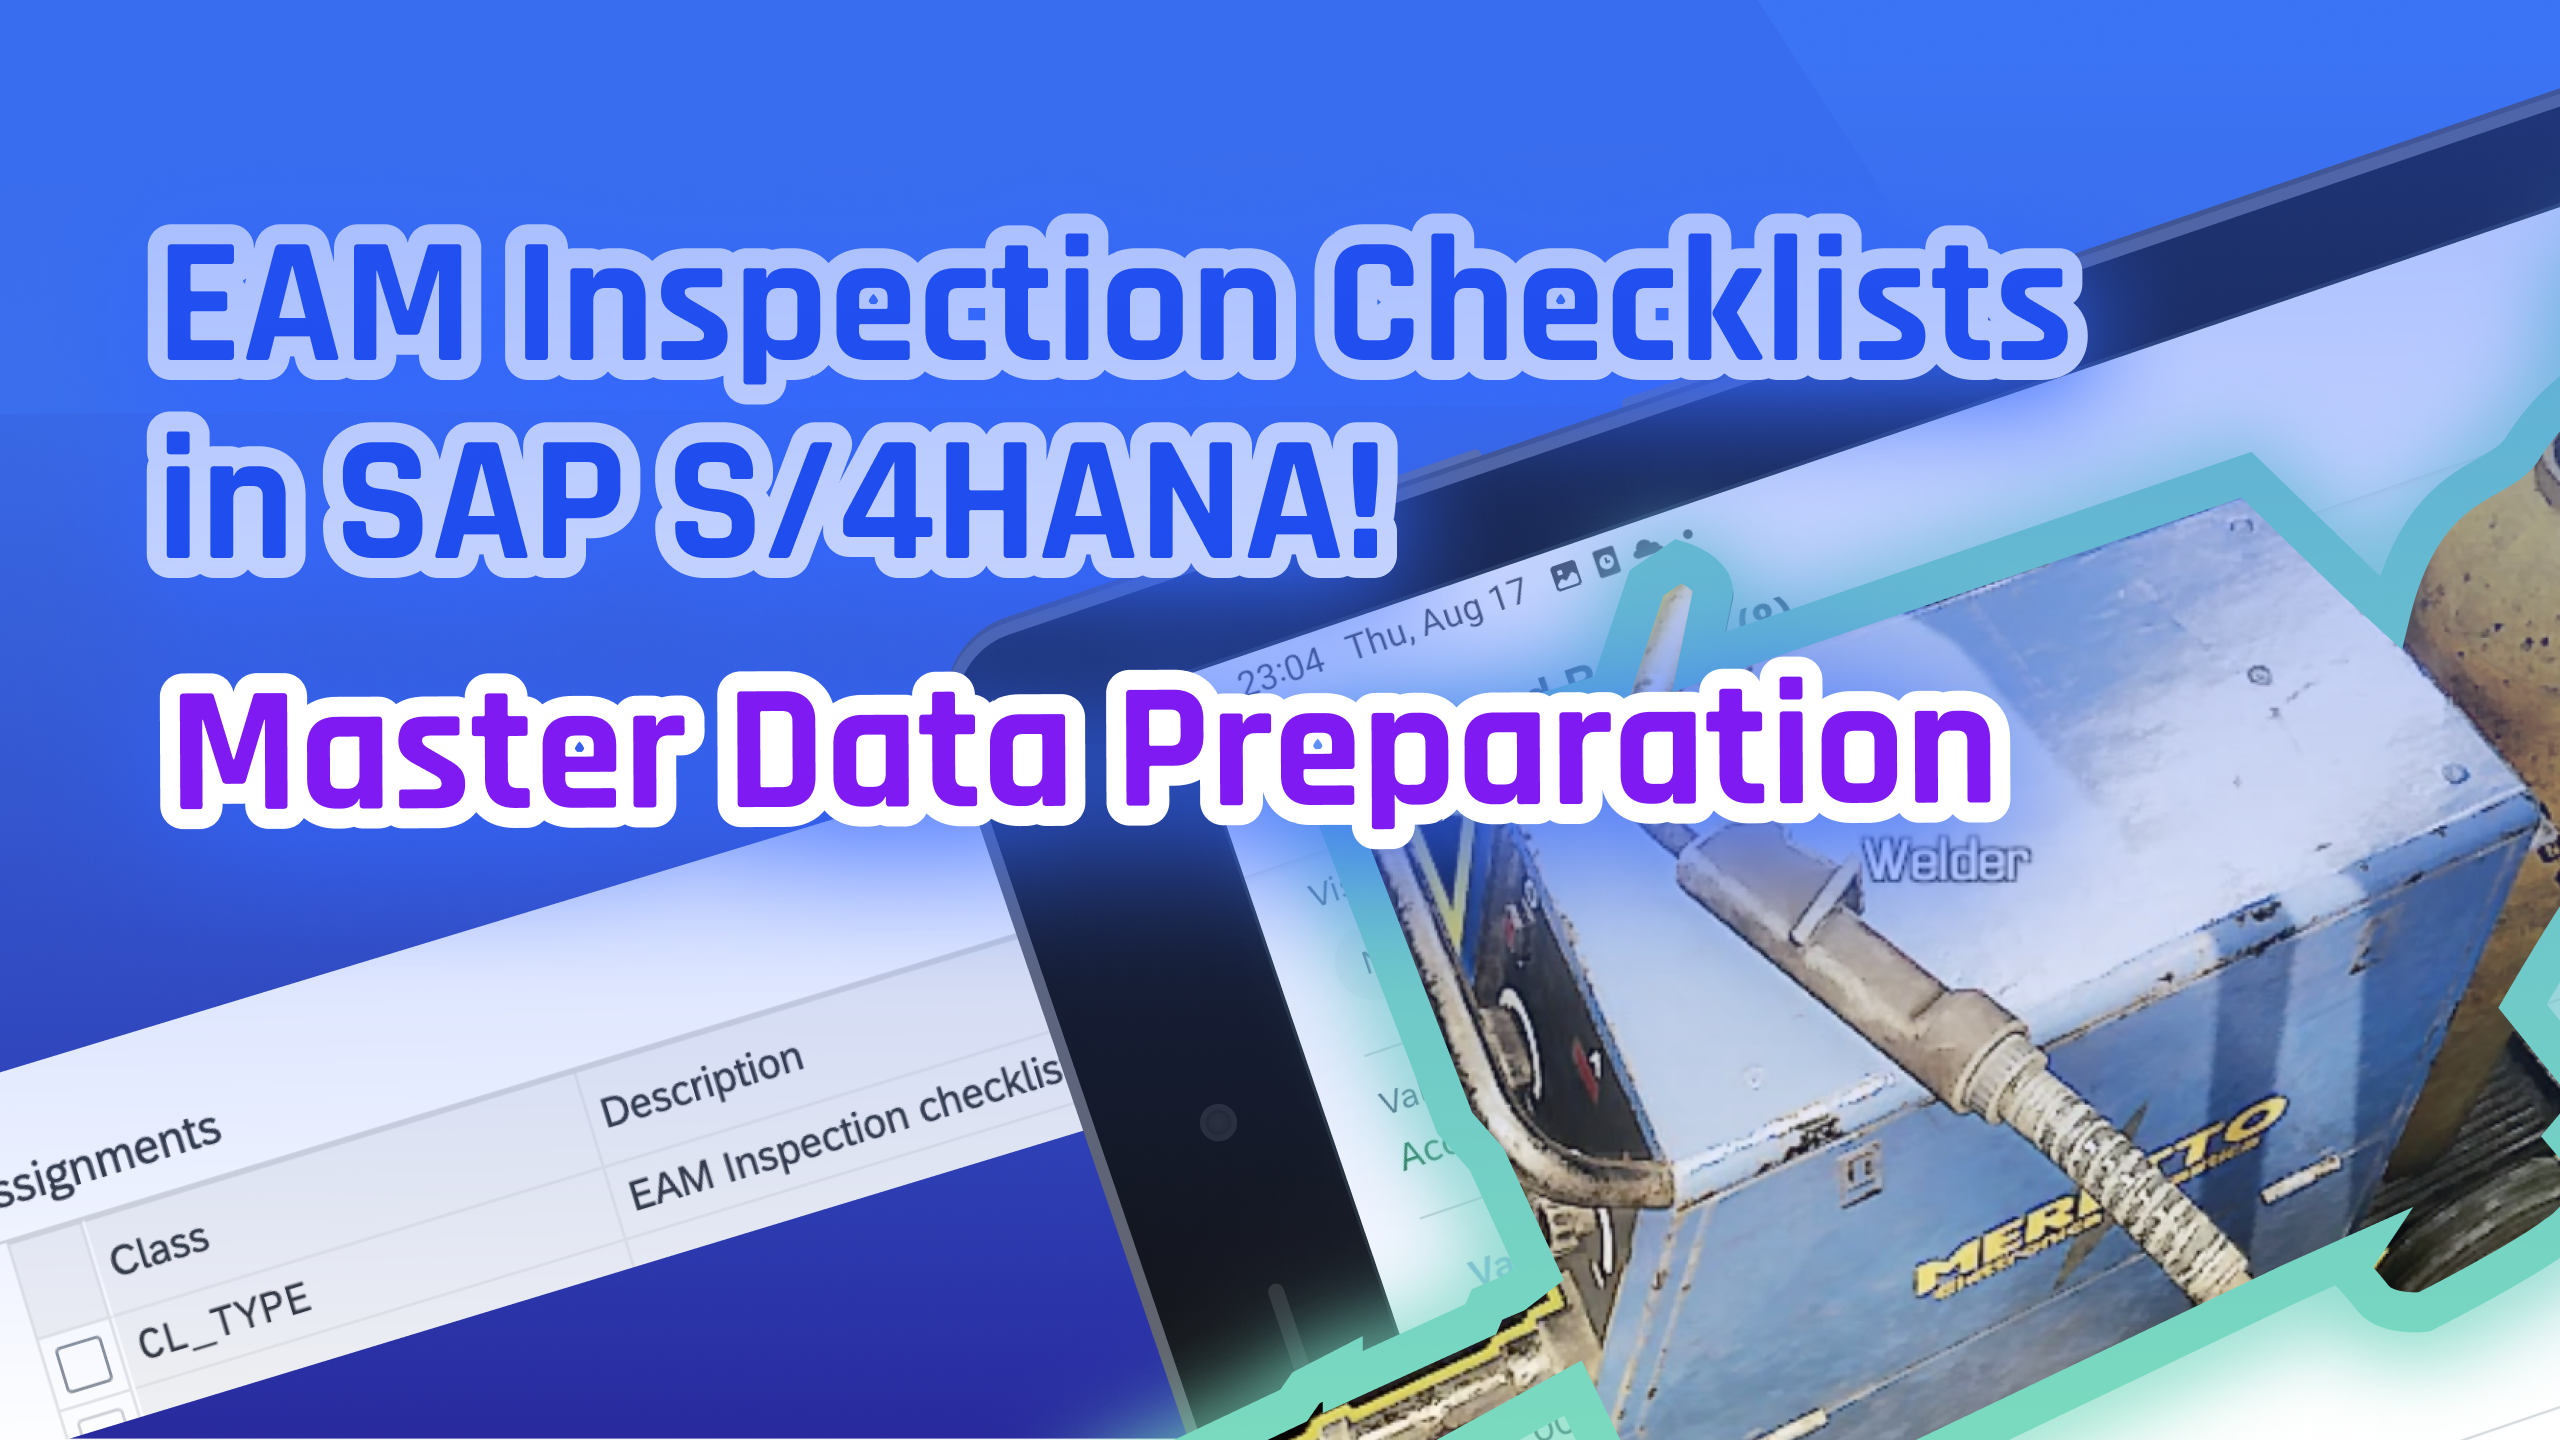 SAP EAM Inspection Checklists master data preparation steps, guide, tutorial with step by step instructions